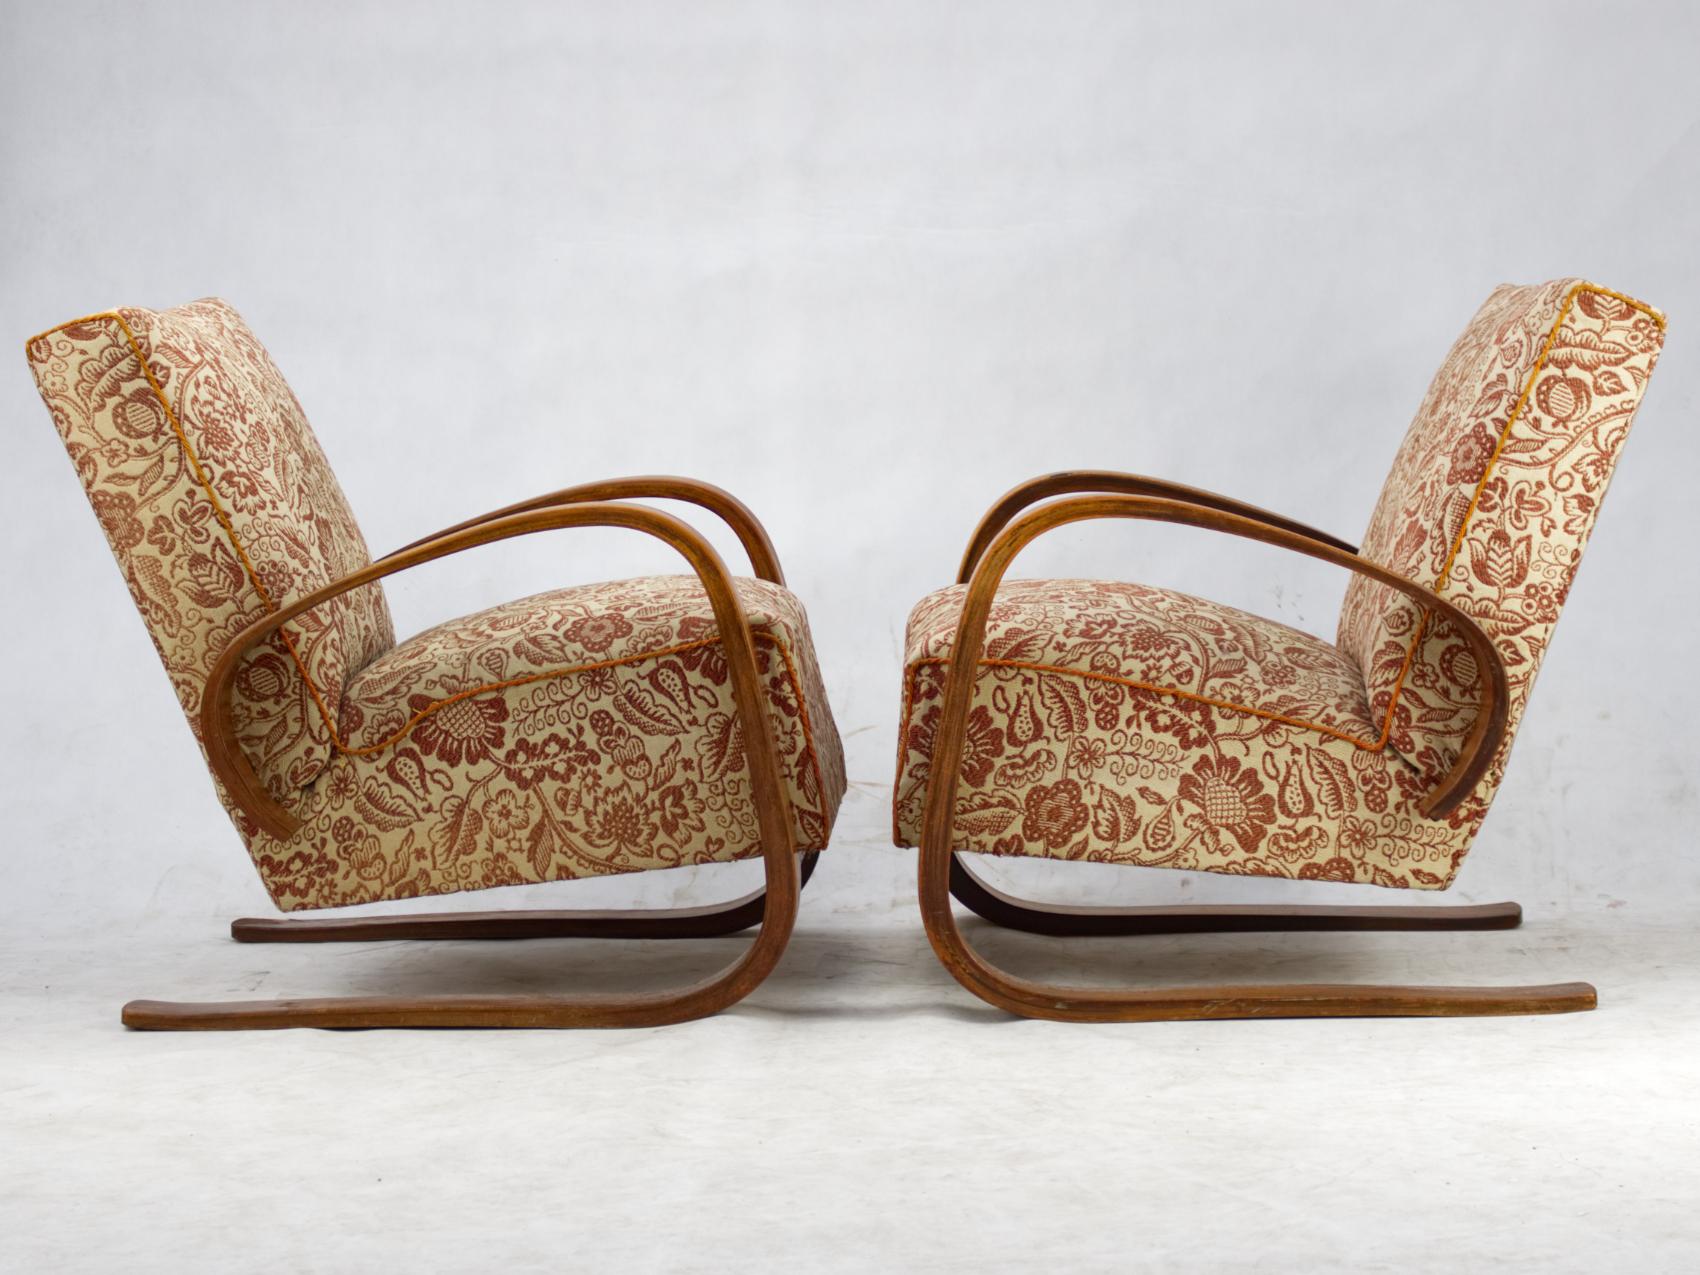 A pair of armchairs designed by Miroslav Navratil in the style of the 